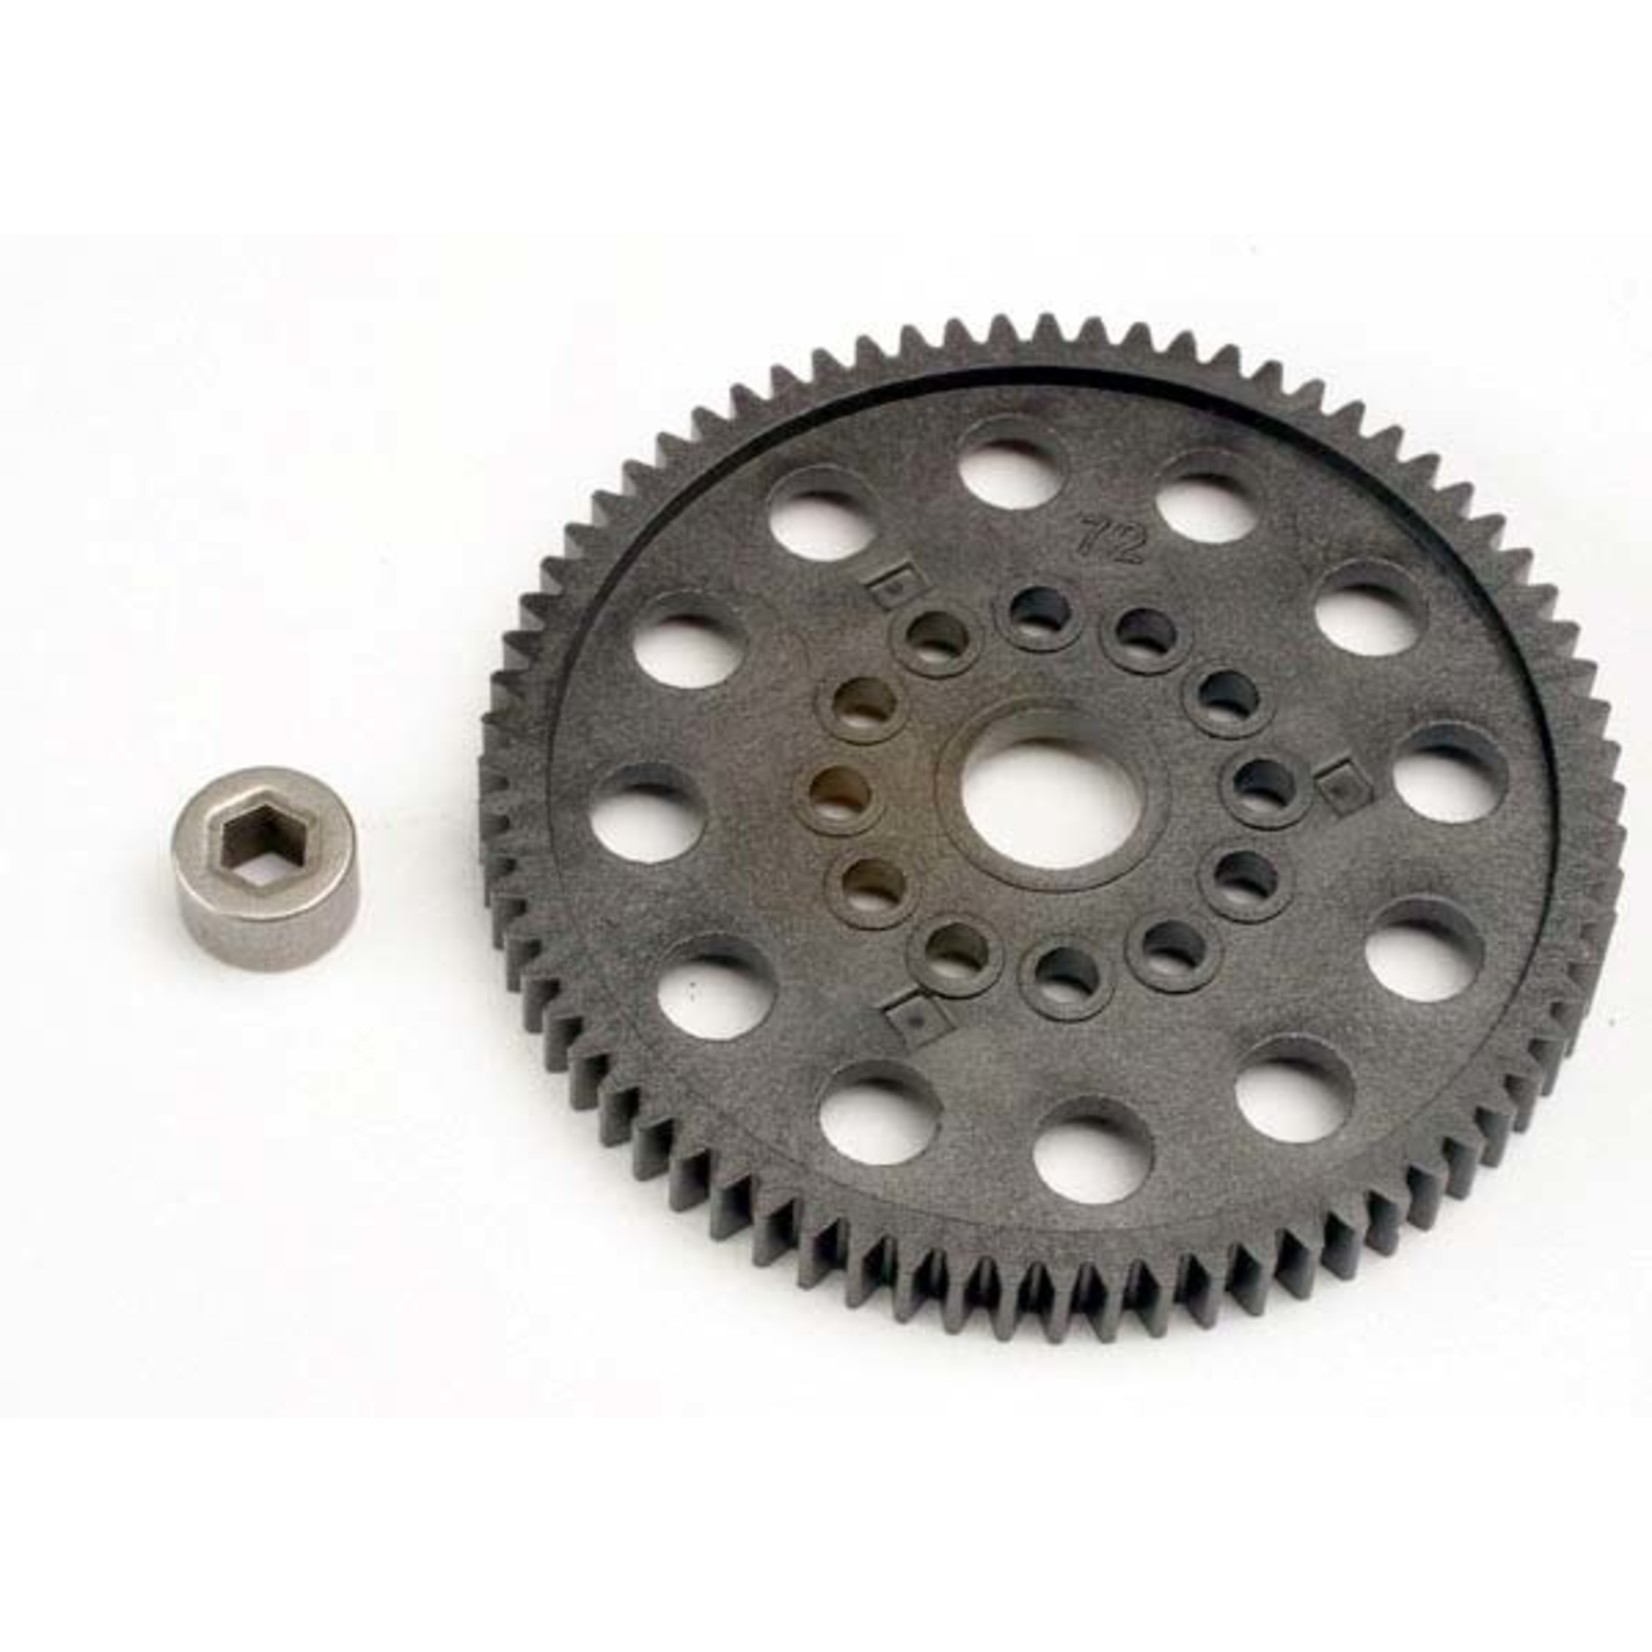 Traxxas 4472 - Spur gear (72-tooth) (32-Pitch) w/bushing